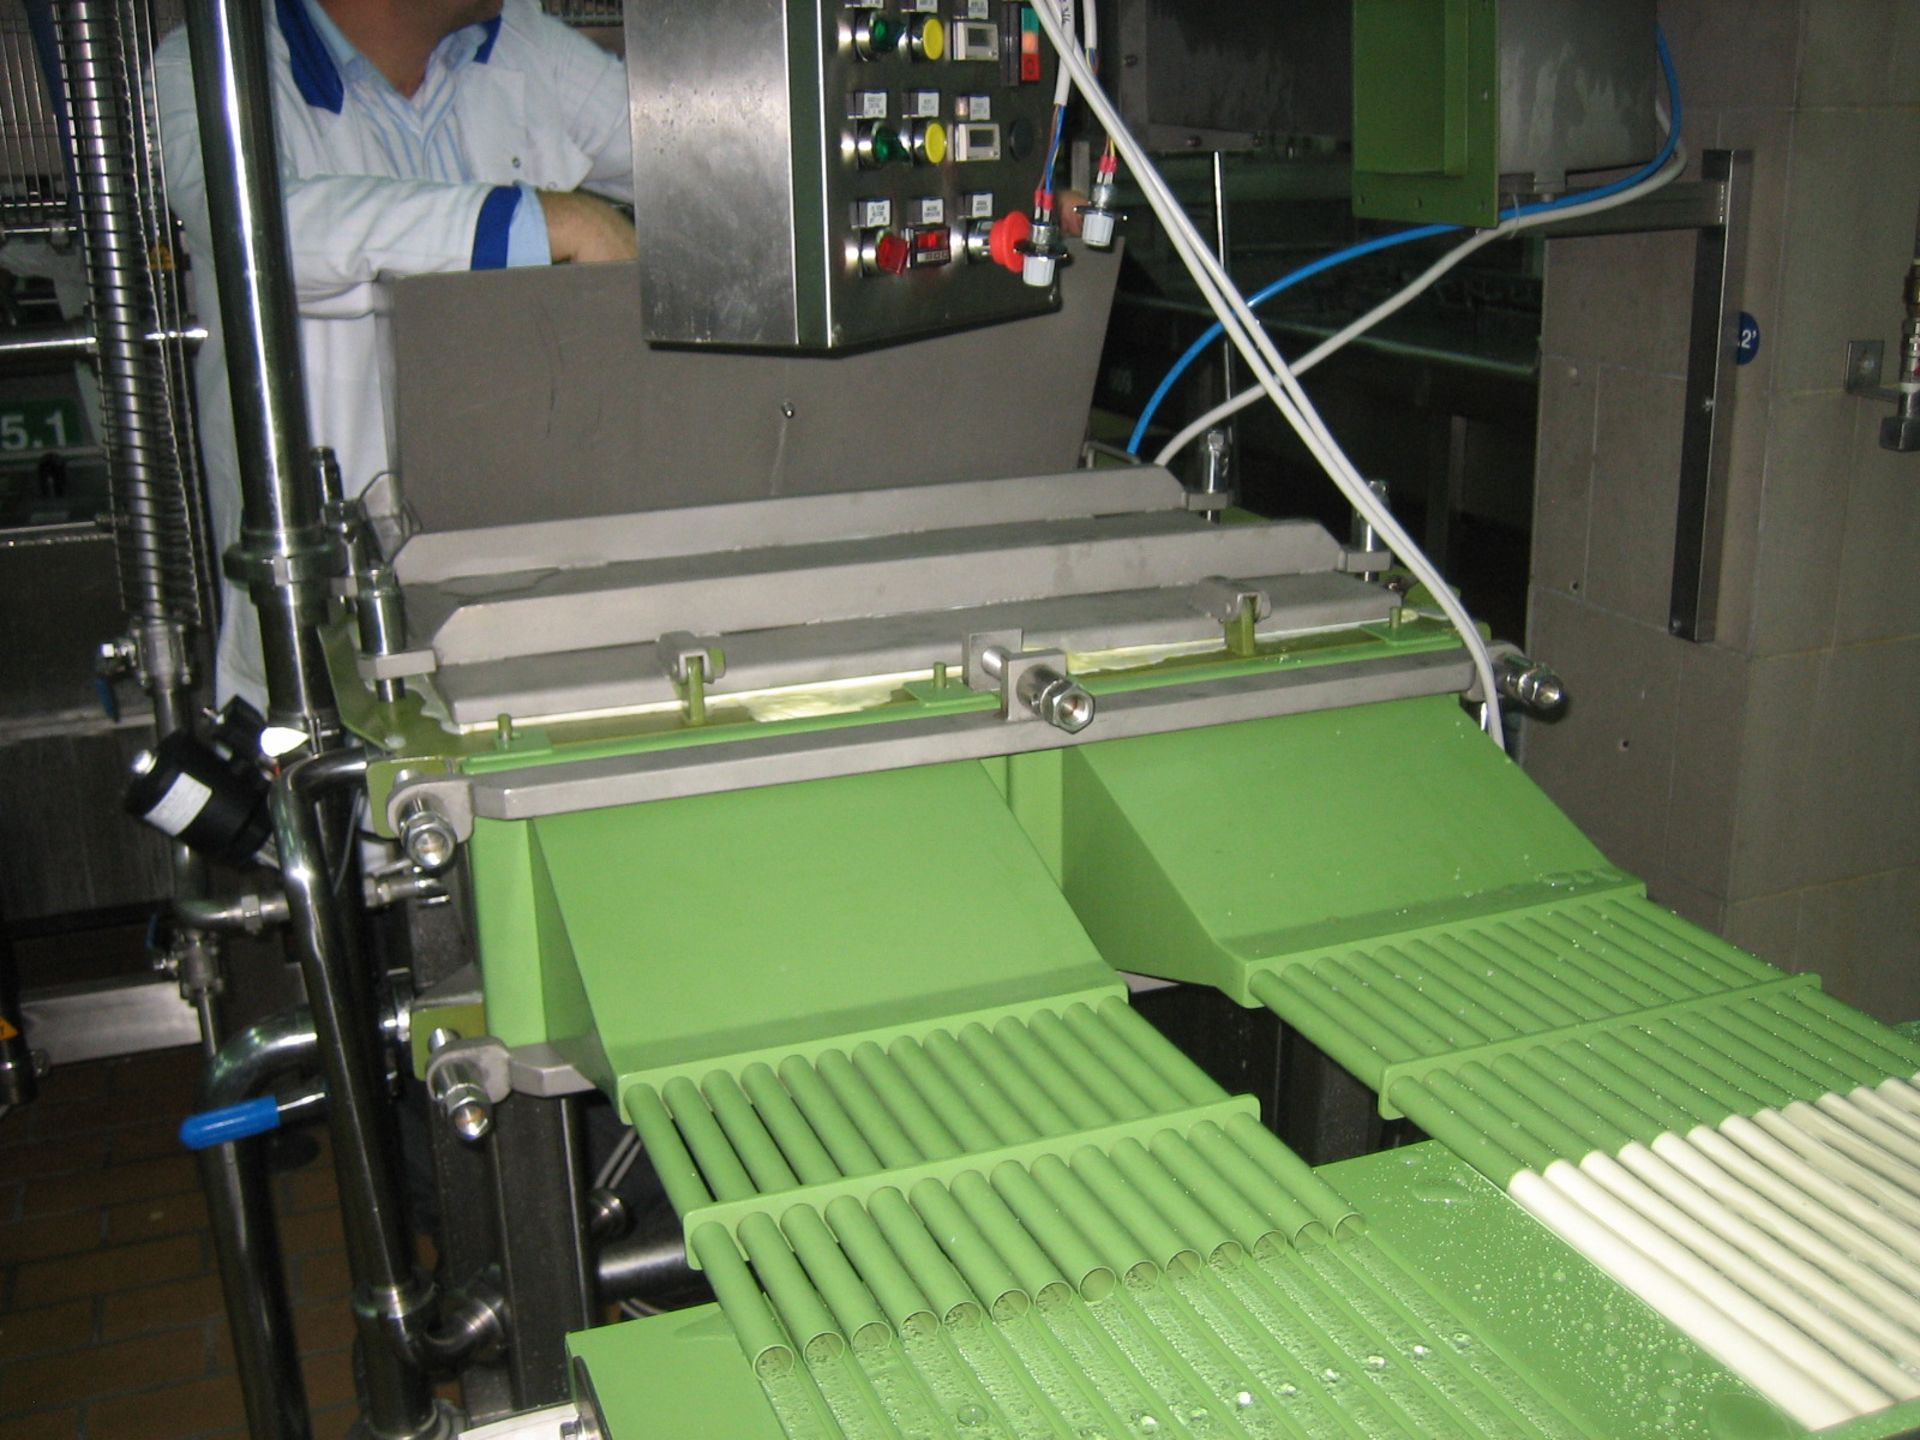 2X COMAT PROCESSING LINES FOR MOZZARELLA CHEESE TO PRODUCE MOZZARELLA STICKS AND MOZZARELLA BLOCKS - Image 9 of 10